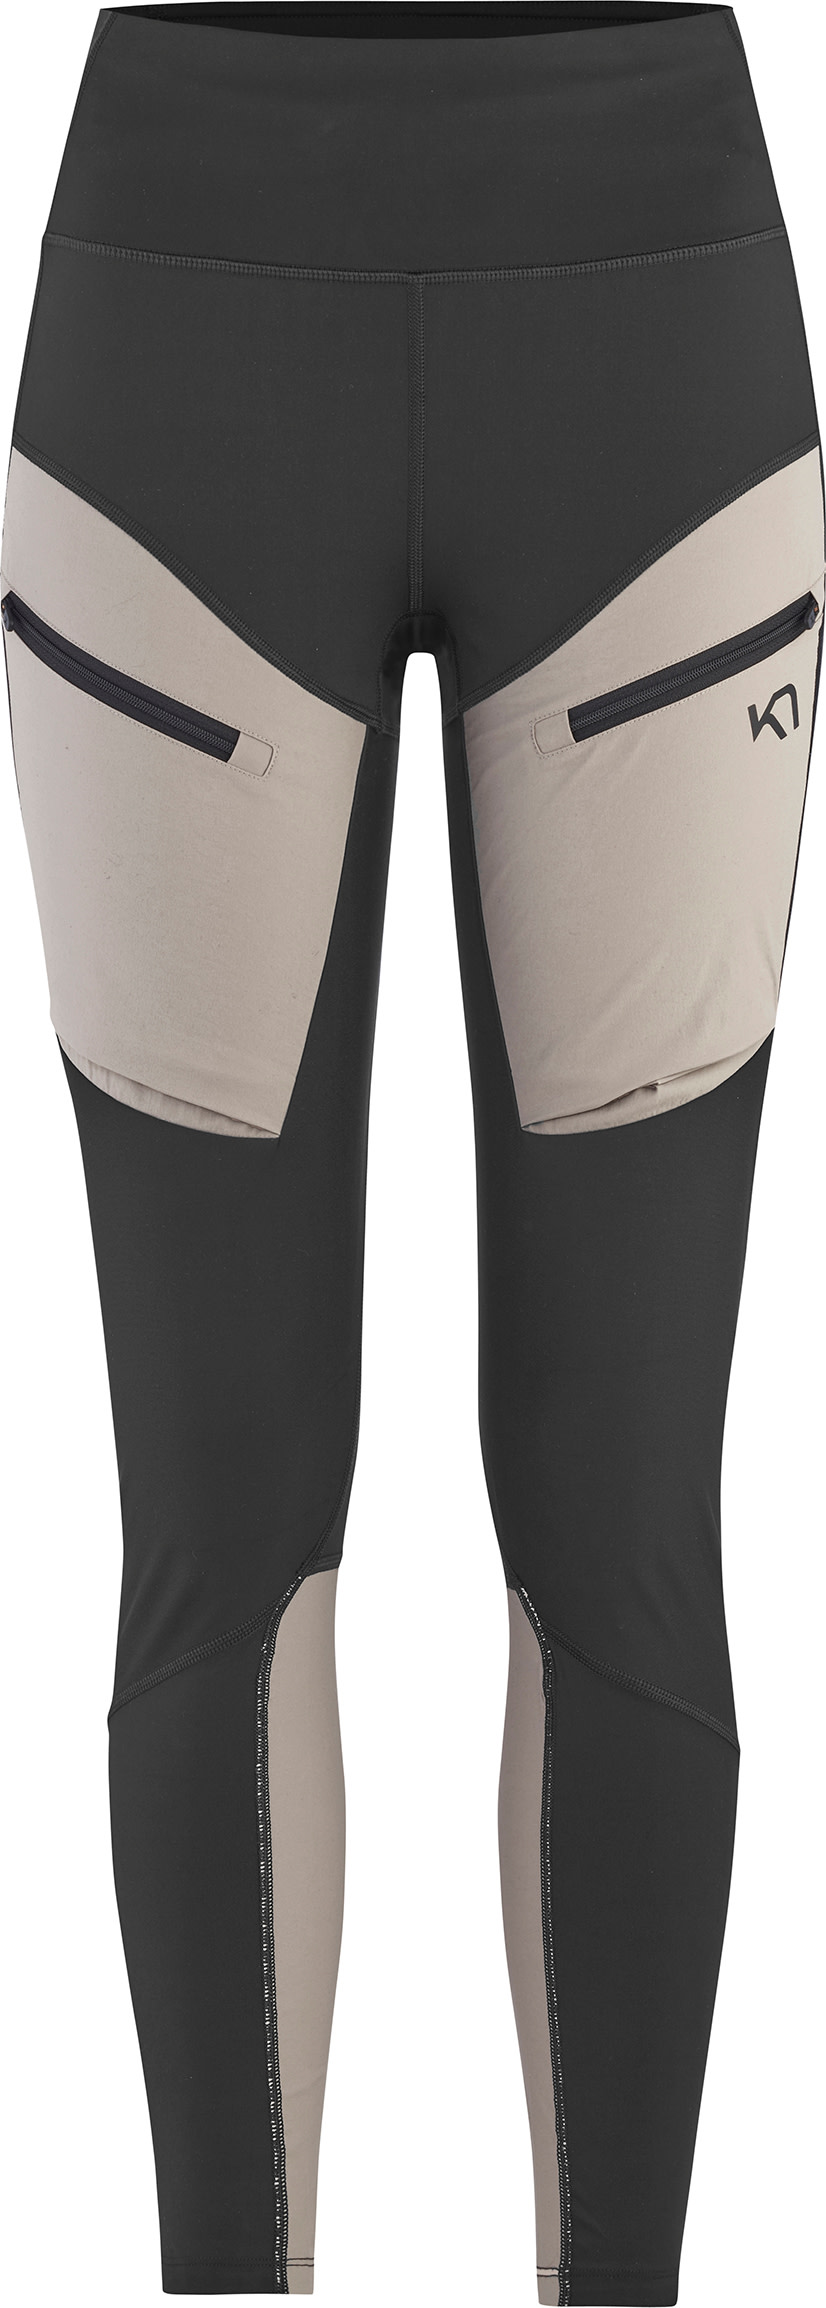 Women's Ane Hiking Tights SYRUP